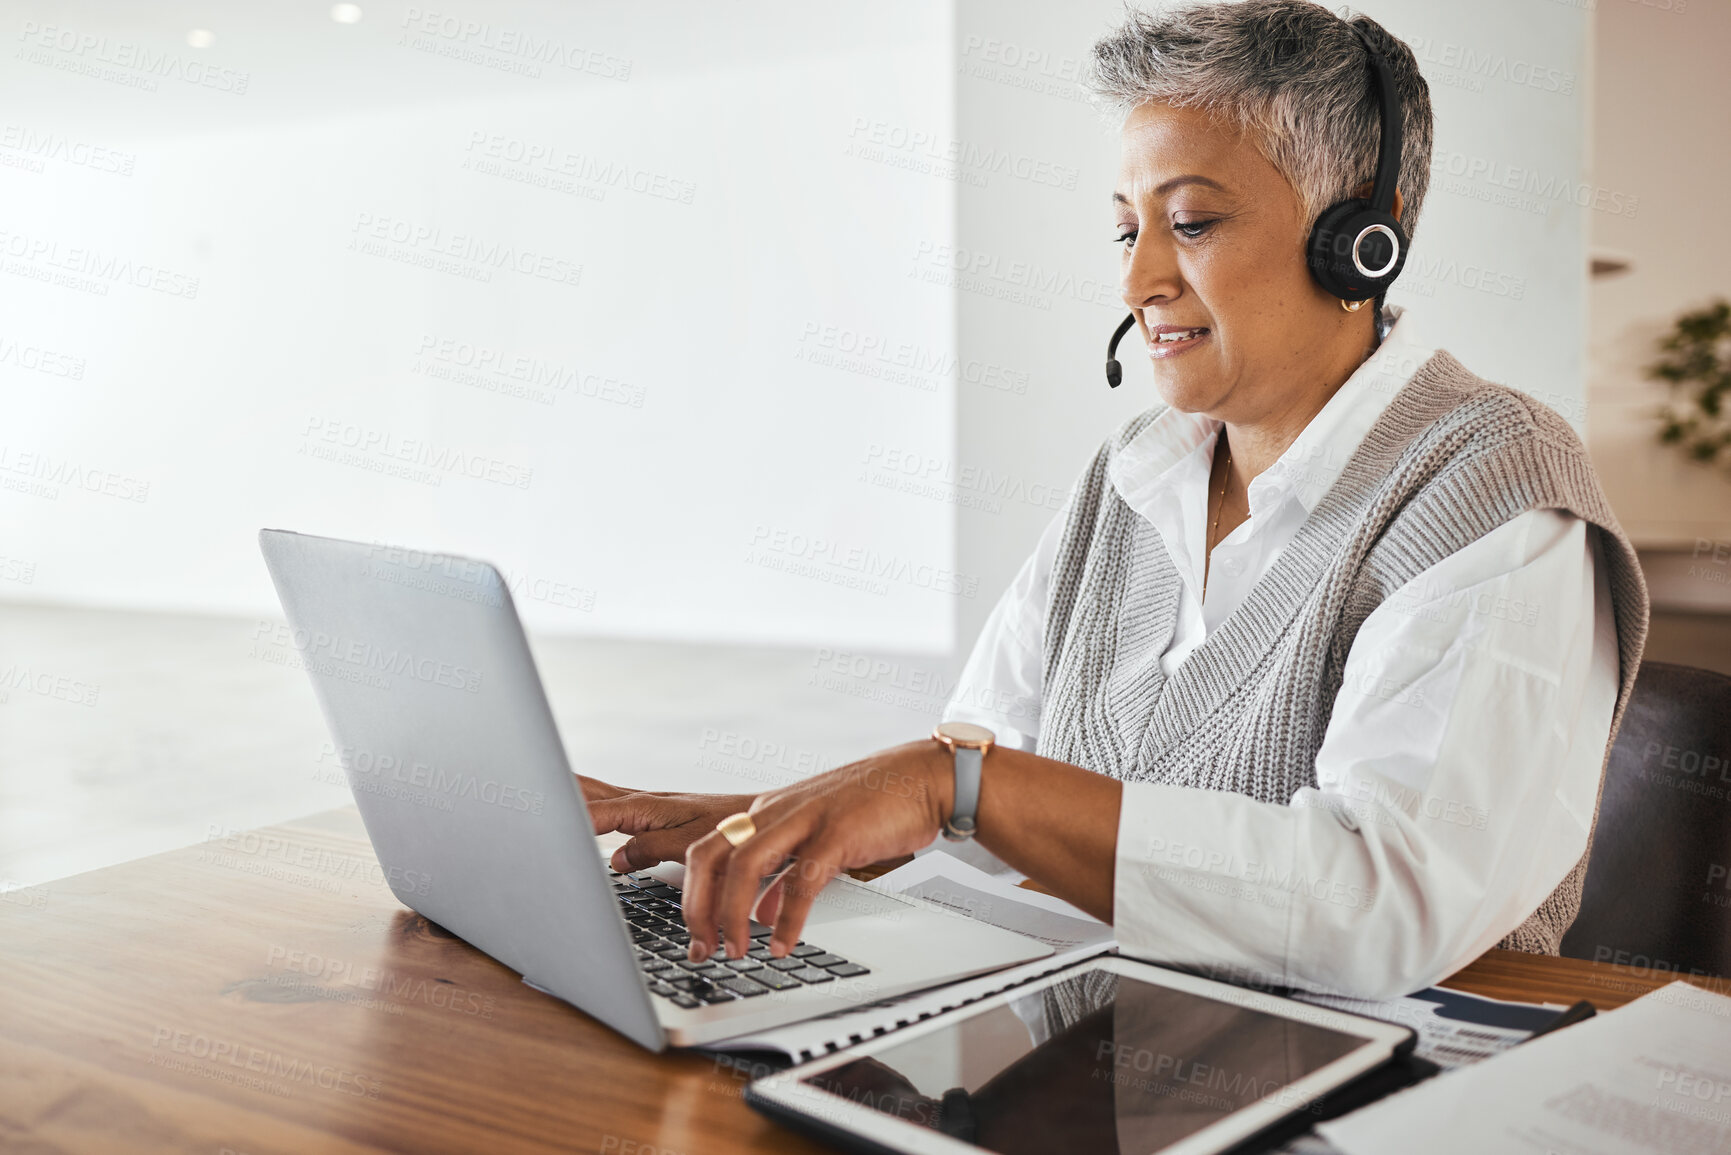 Buy stock photo Call center, receptionist and senior consultant working on a laptop, headset and tablet in the office. Customer support, hotline and elderly female telemarketing agent typing on computer in workplace